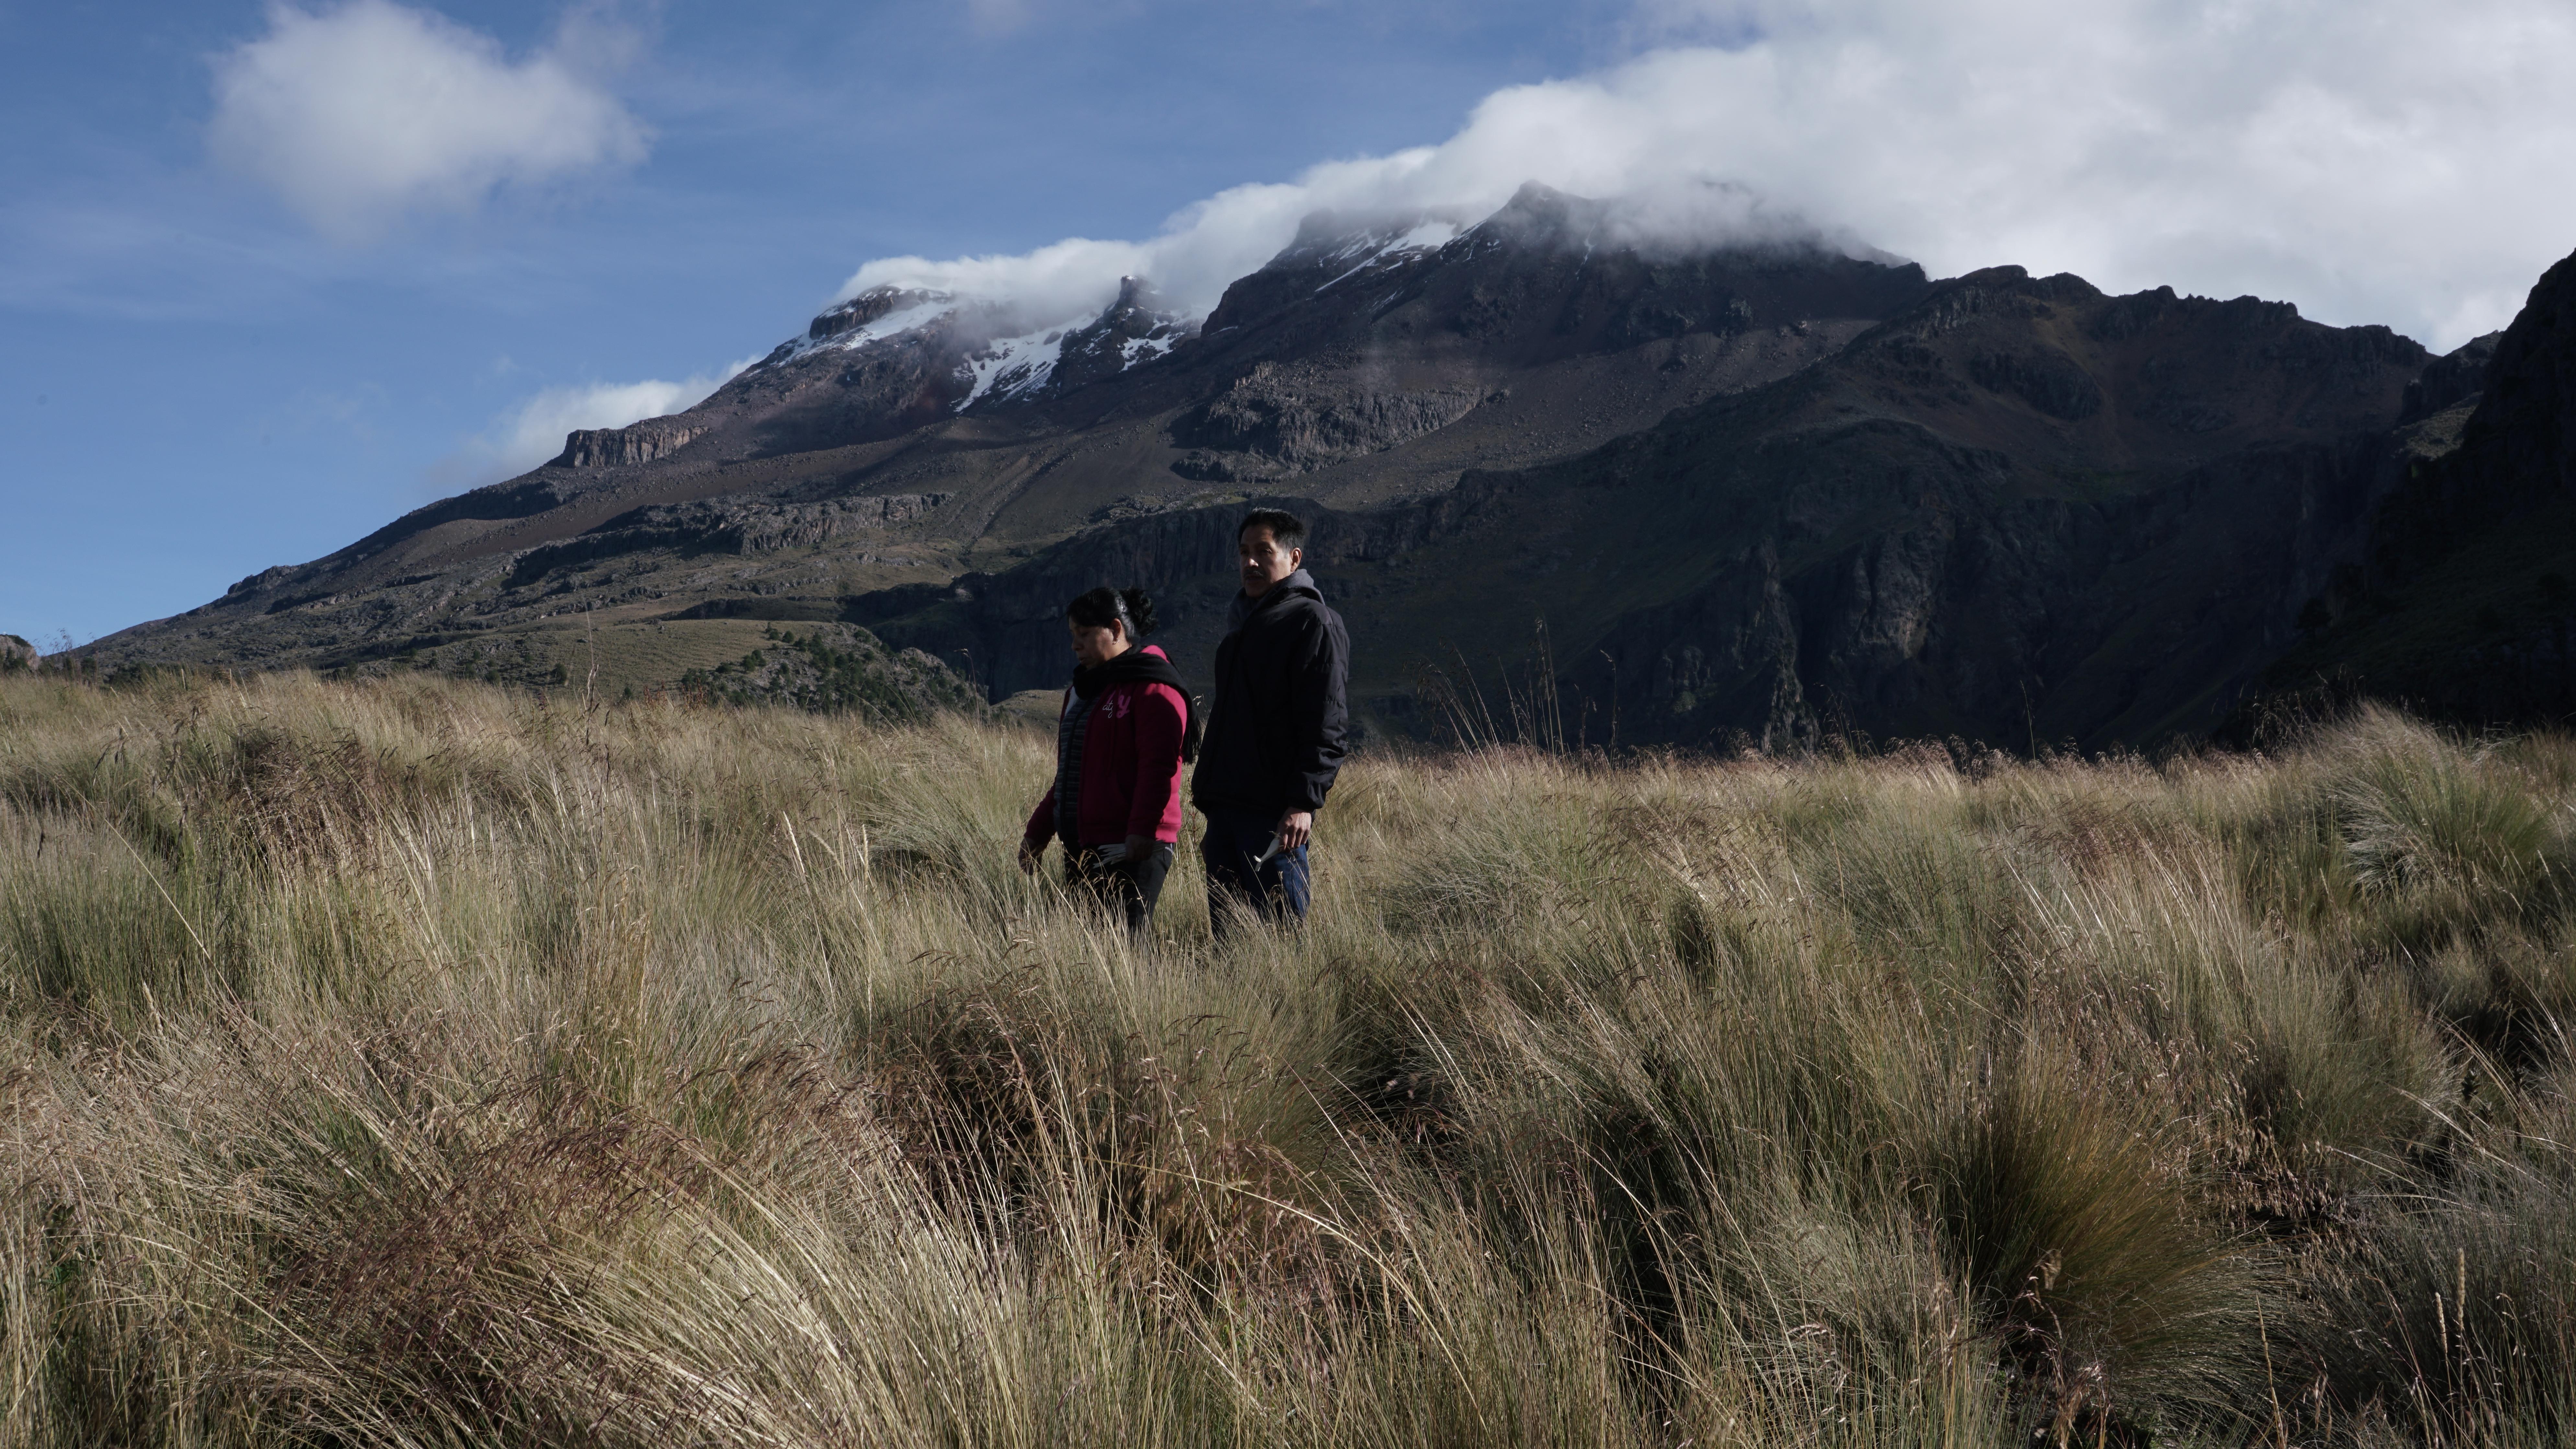 Two people stand in a field of tall grass. A large mountain range extends into the distance behind them.